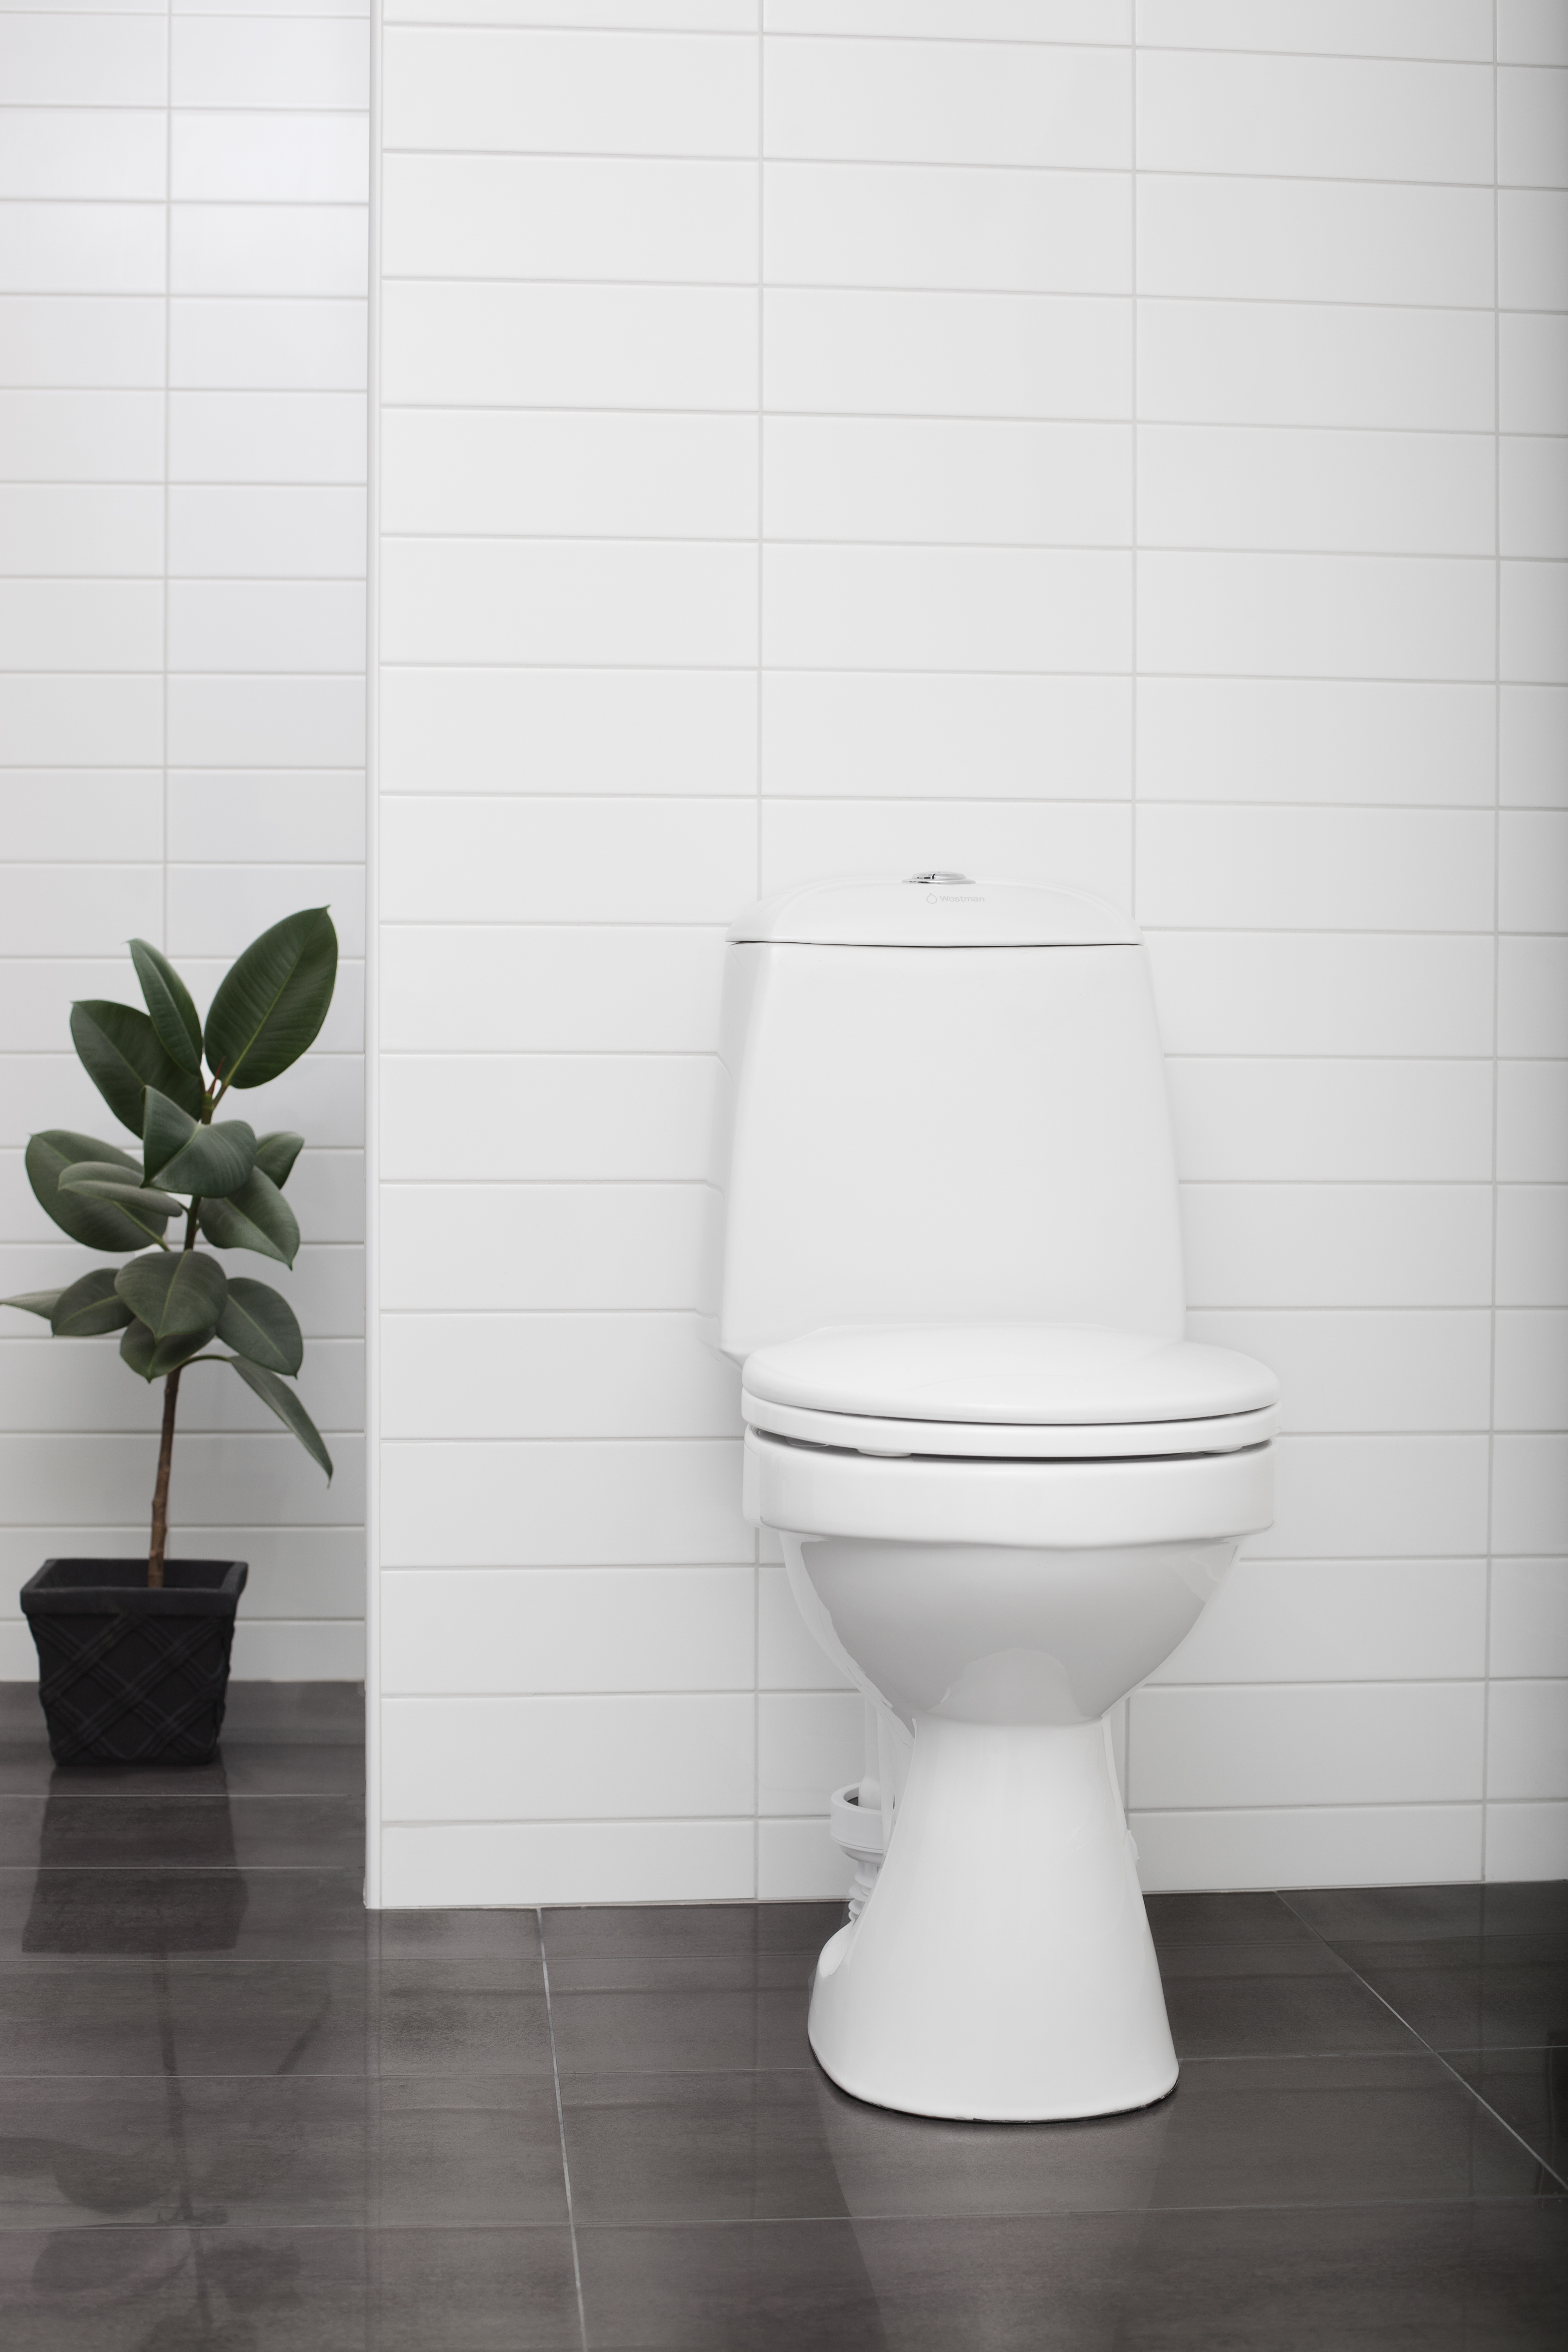 Wostman eco-flush toilet in a white walled bathroom and plant